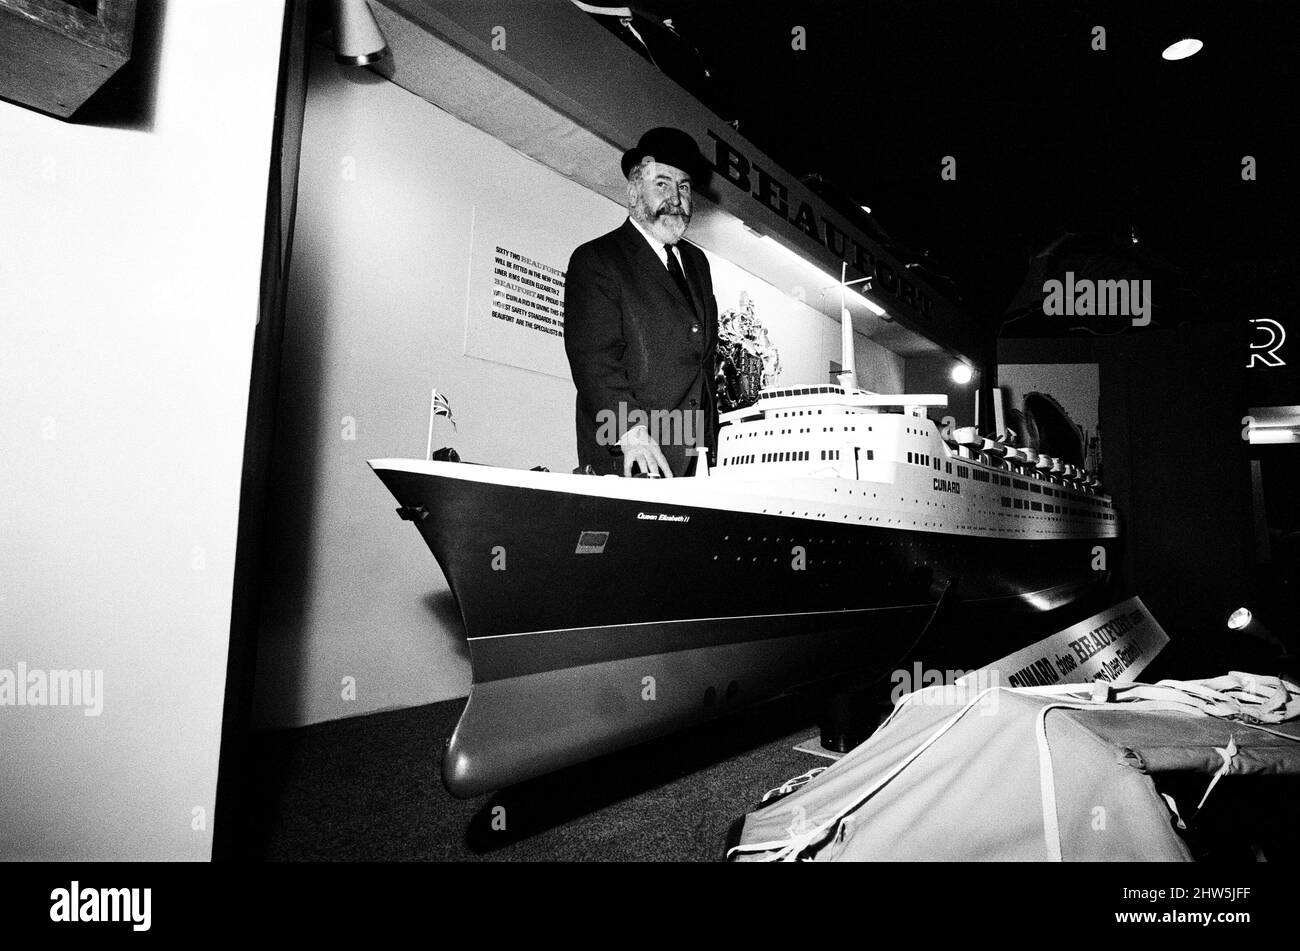 Captain William Warwick the new master of the Cunard liner the Queen Elizabeth 2 alongside the model being displayed at the International Boat Show at Earls Court, London. 2nd January 1968. Stock Photo